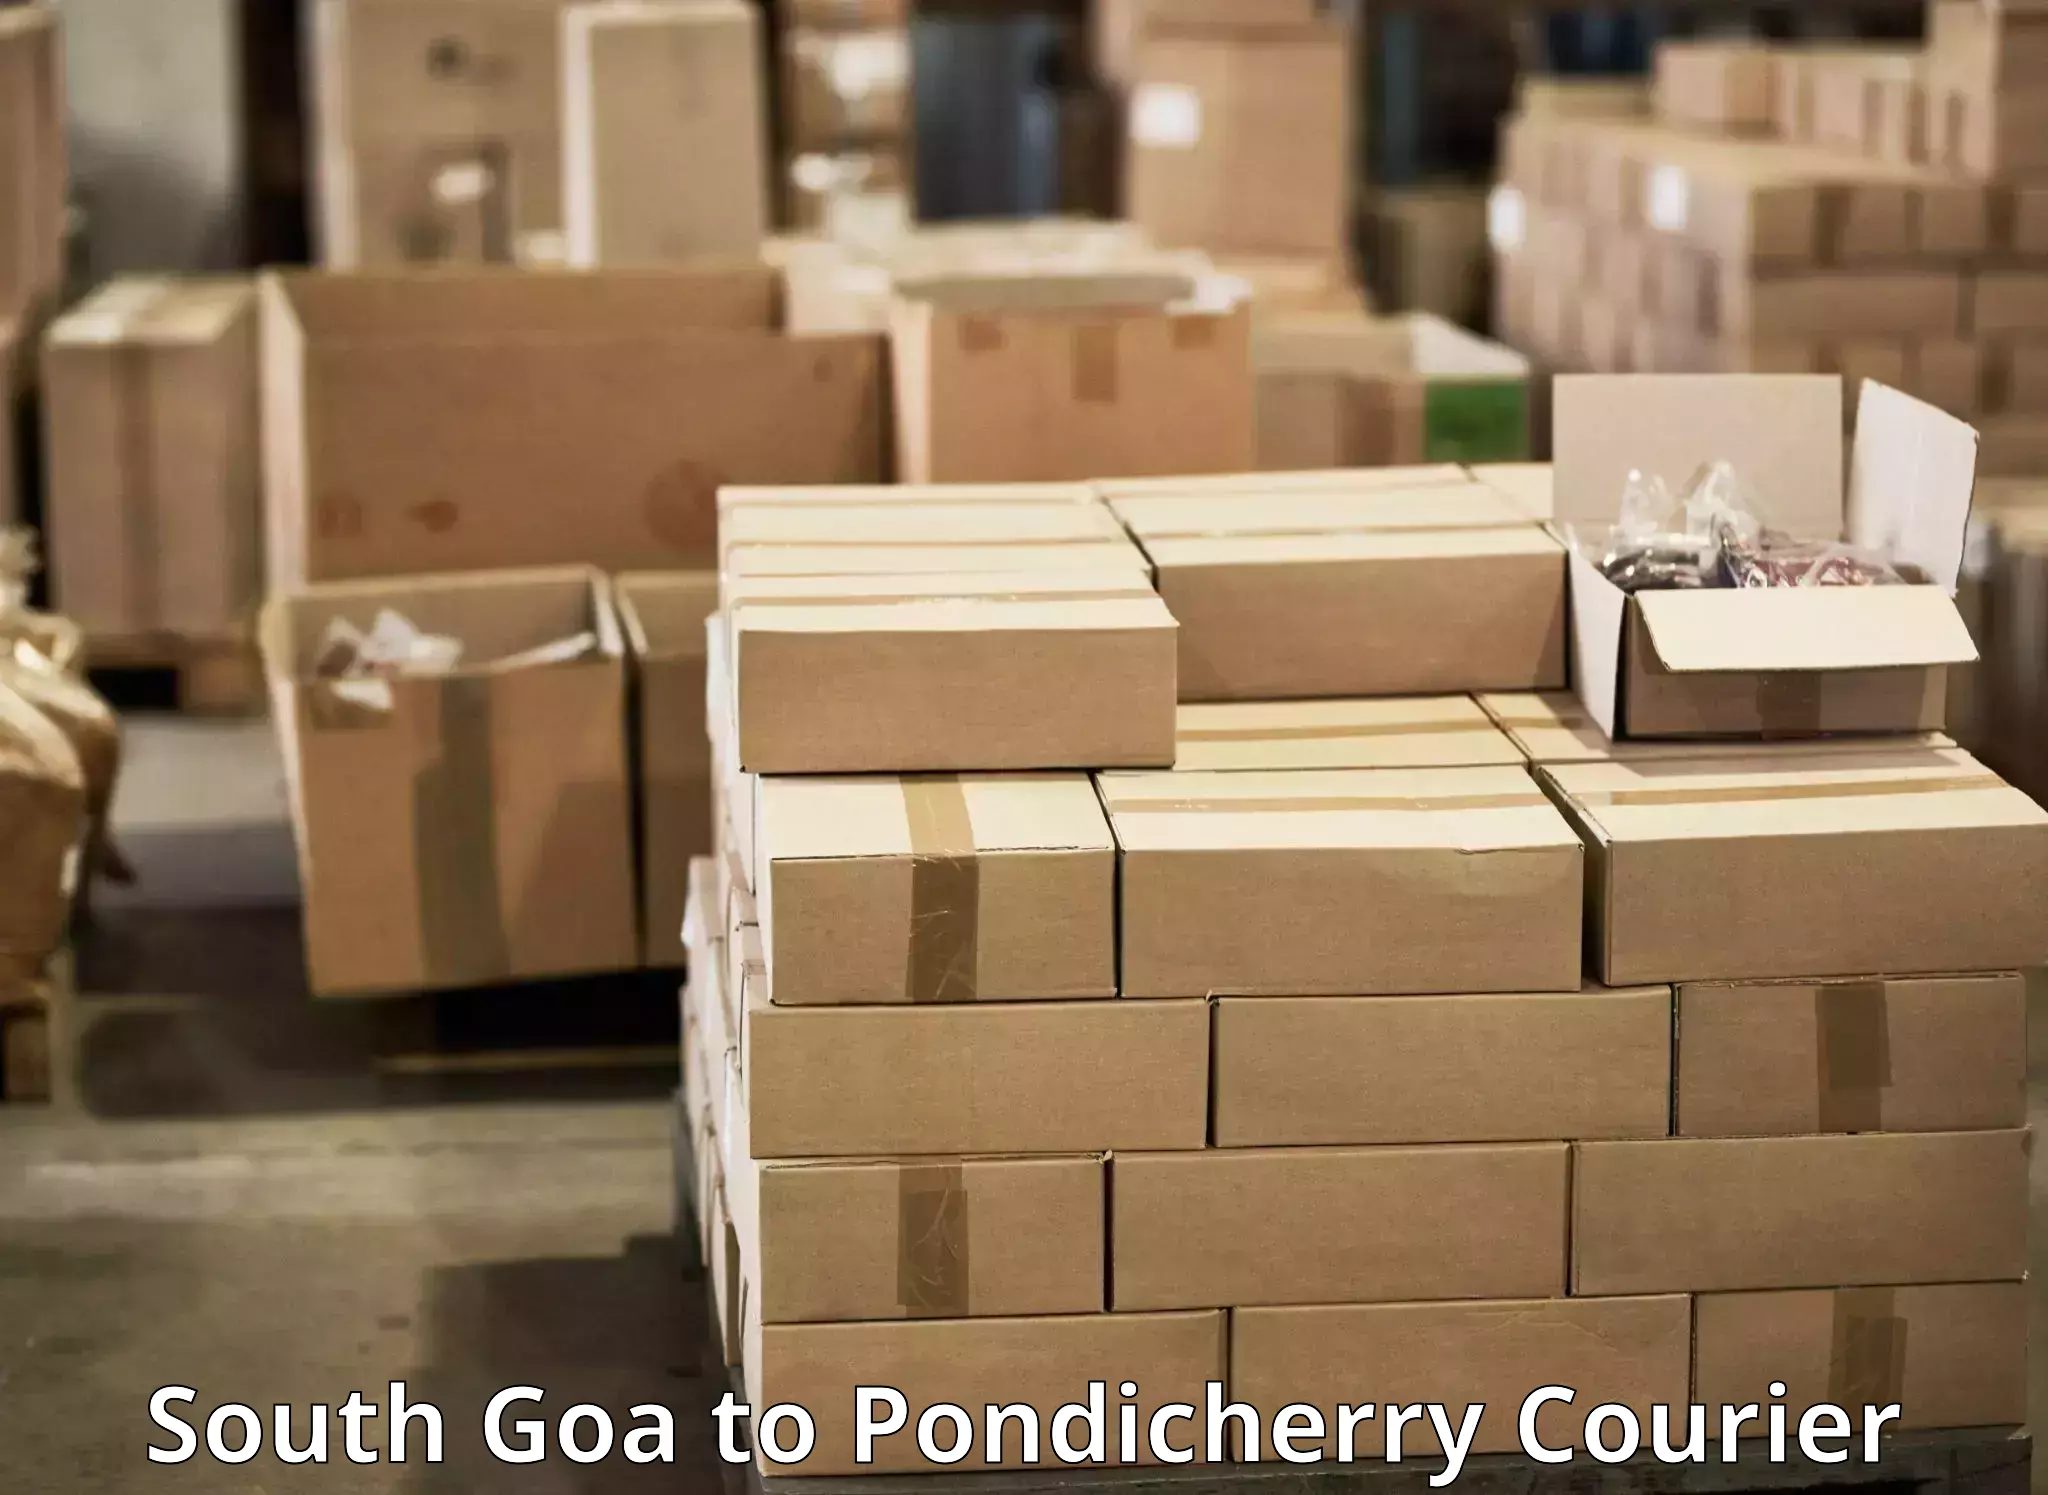 Doorstep delivery service South Goa to Metttupalayam